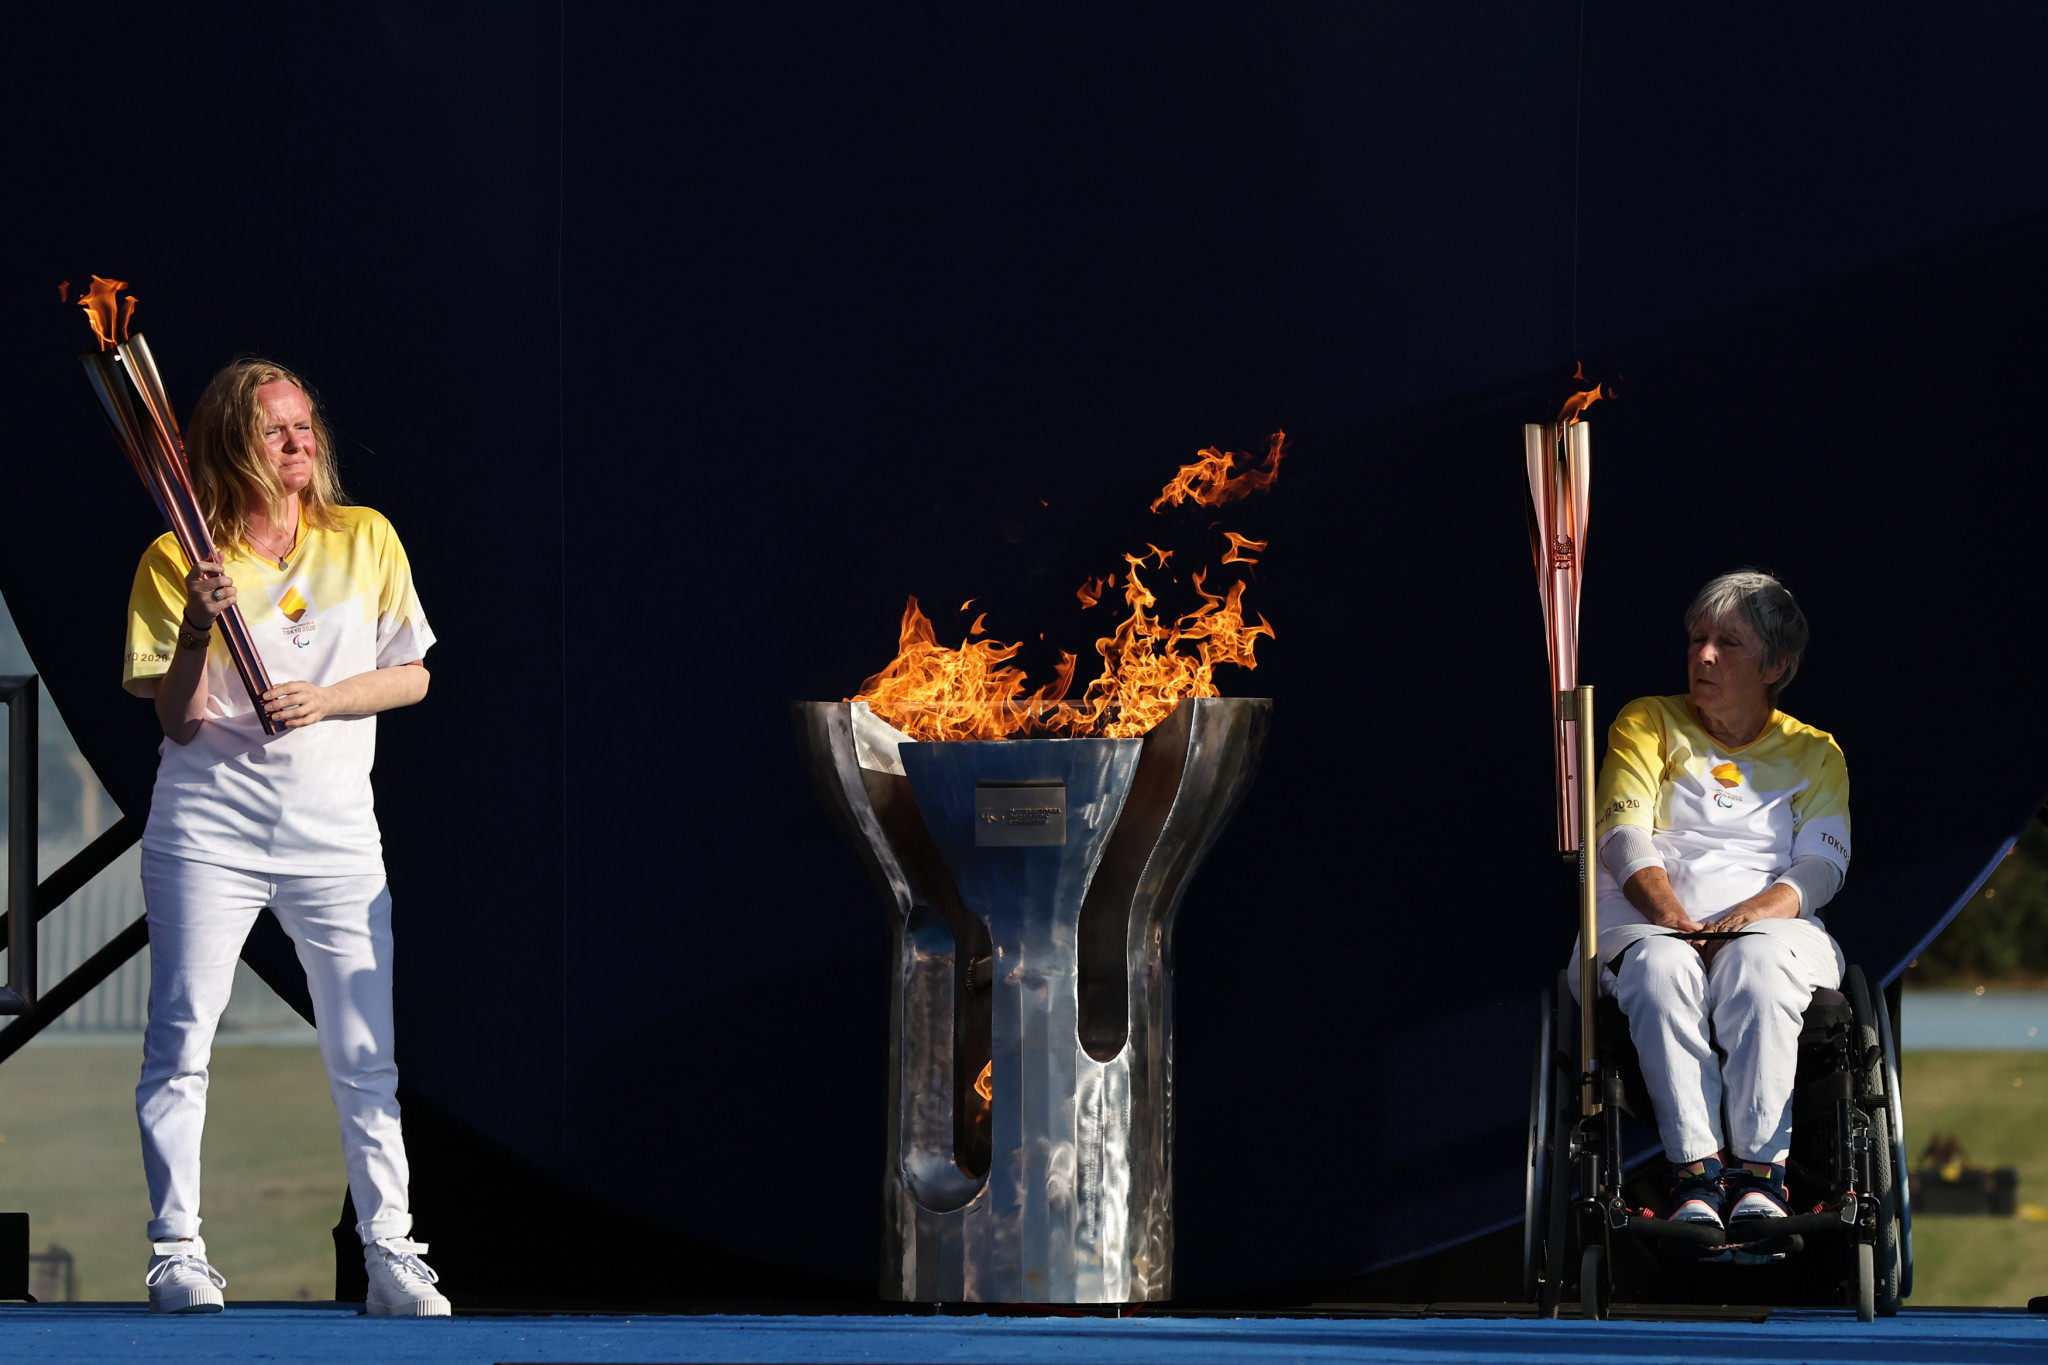 Stoke Mandeville set to stage first standalone Paralympic Flame Lighting Ceremony for Paris 2024